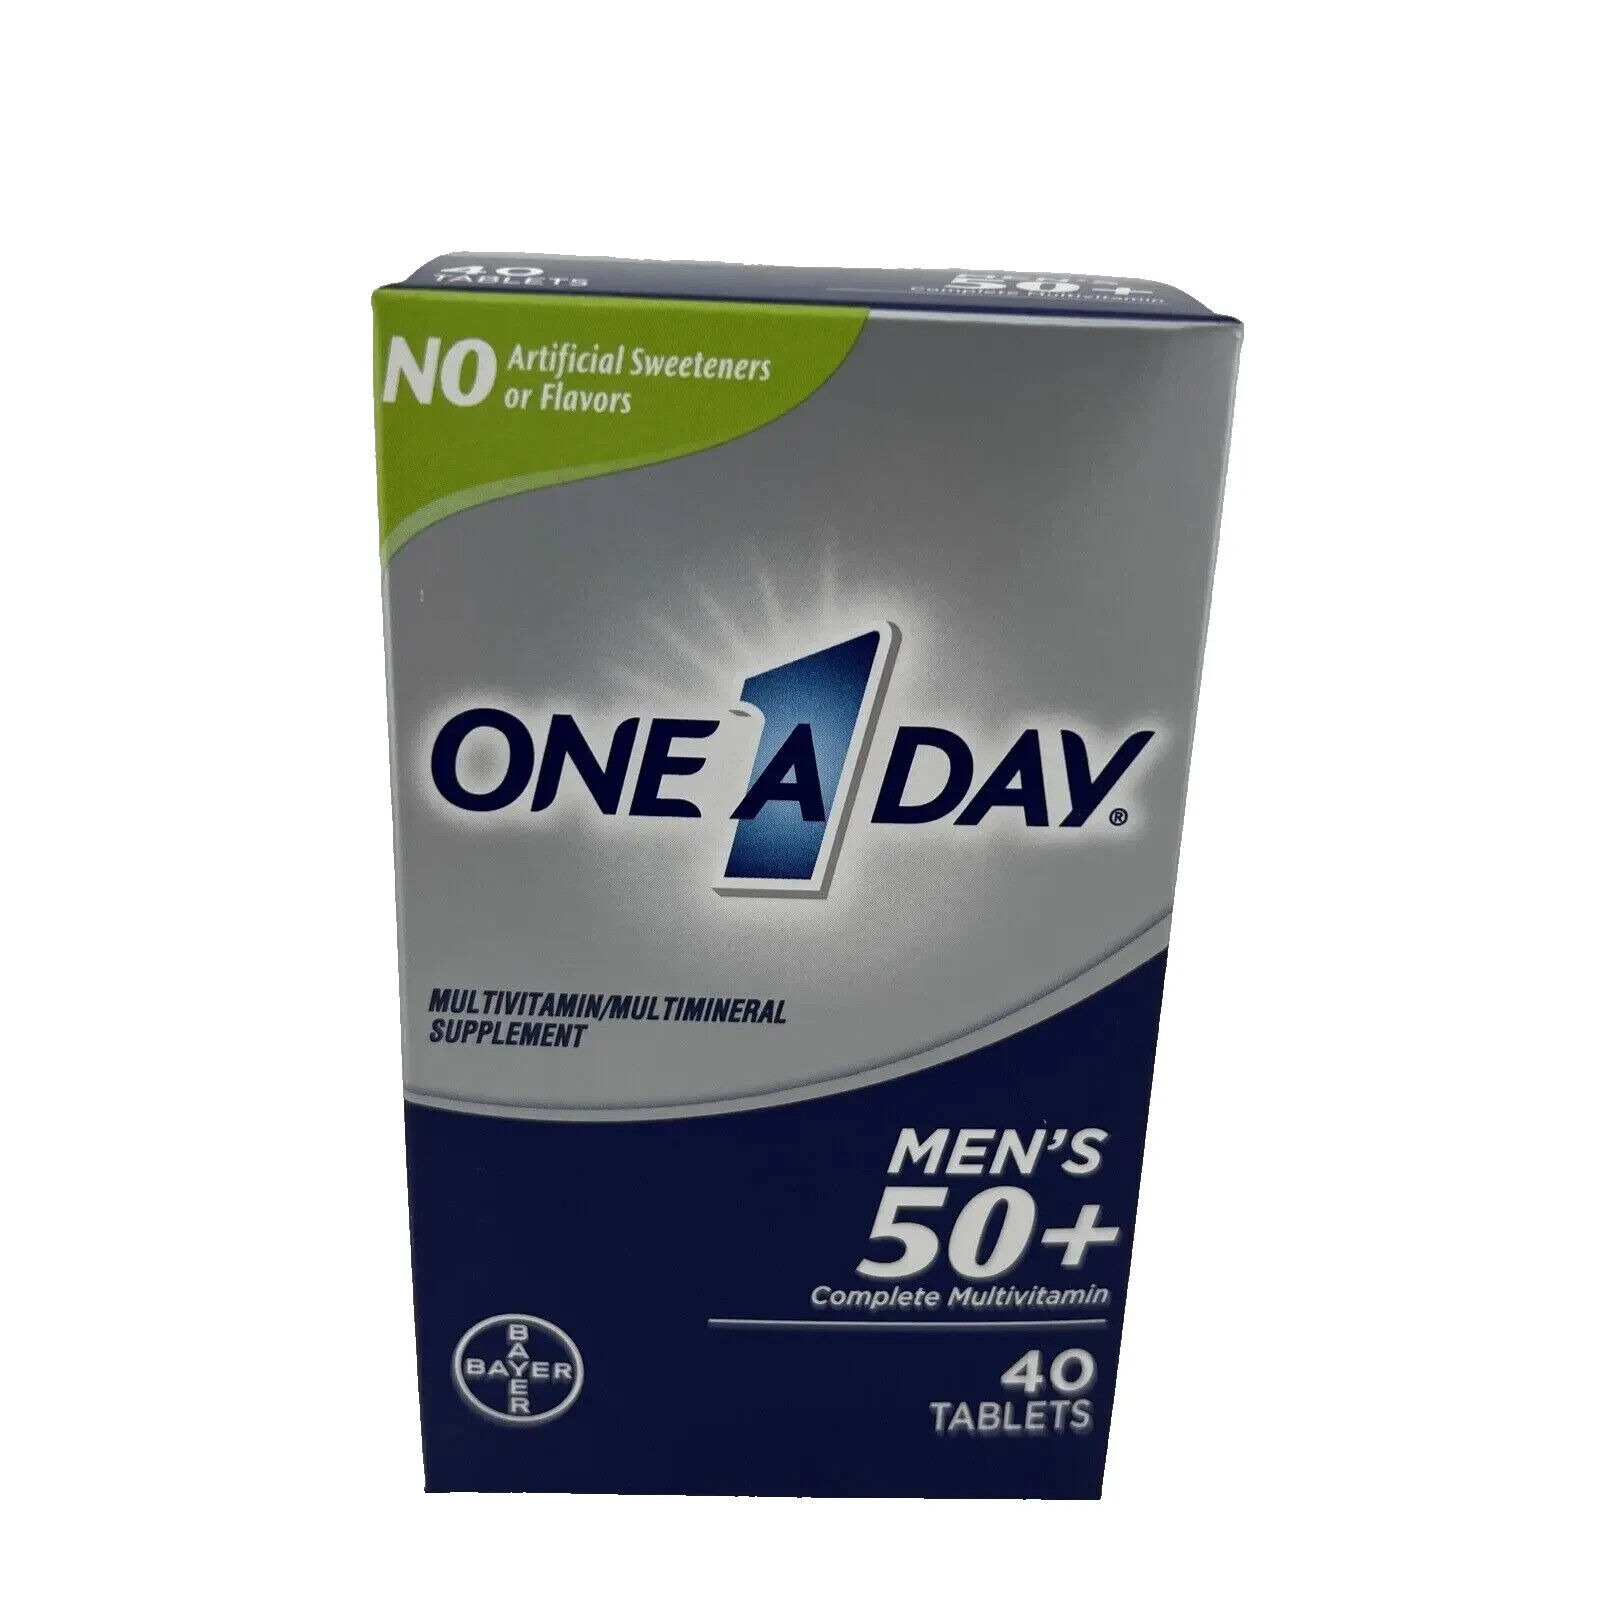 One A Day MEN'S 50+ Complete Multivitamin, 40 Tablets - Brand NEW, FREE SHIPPING